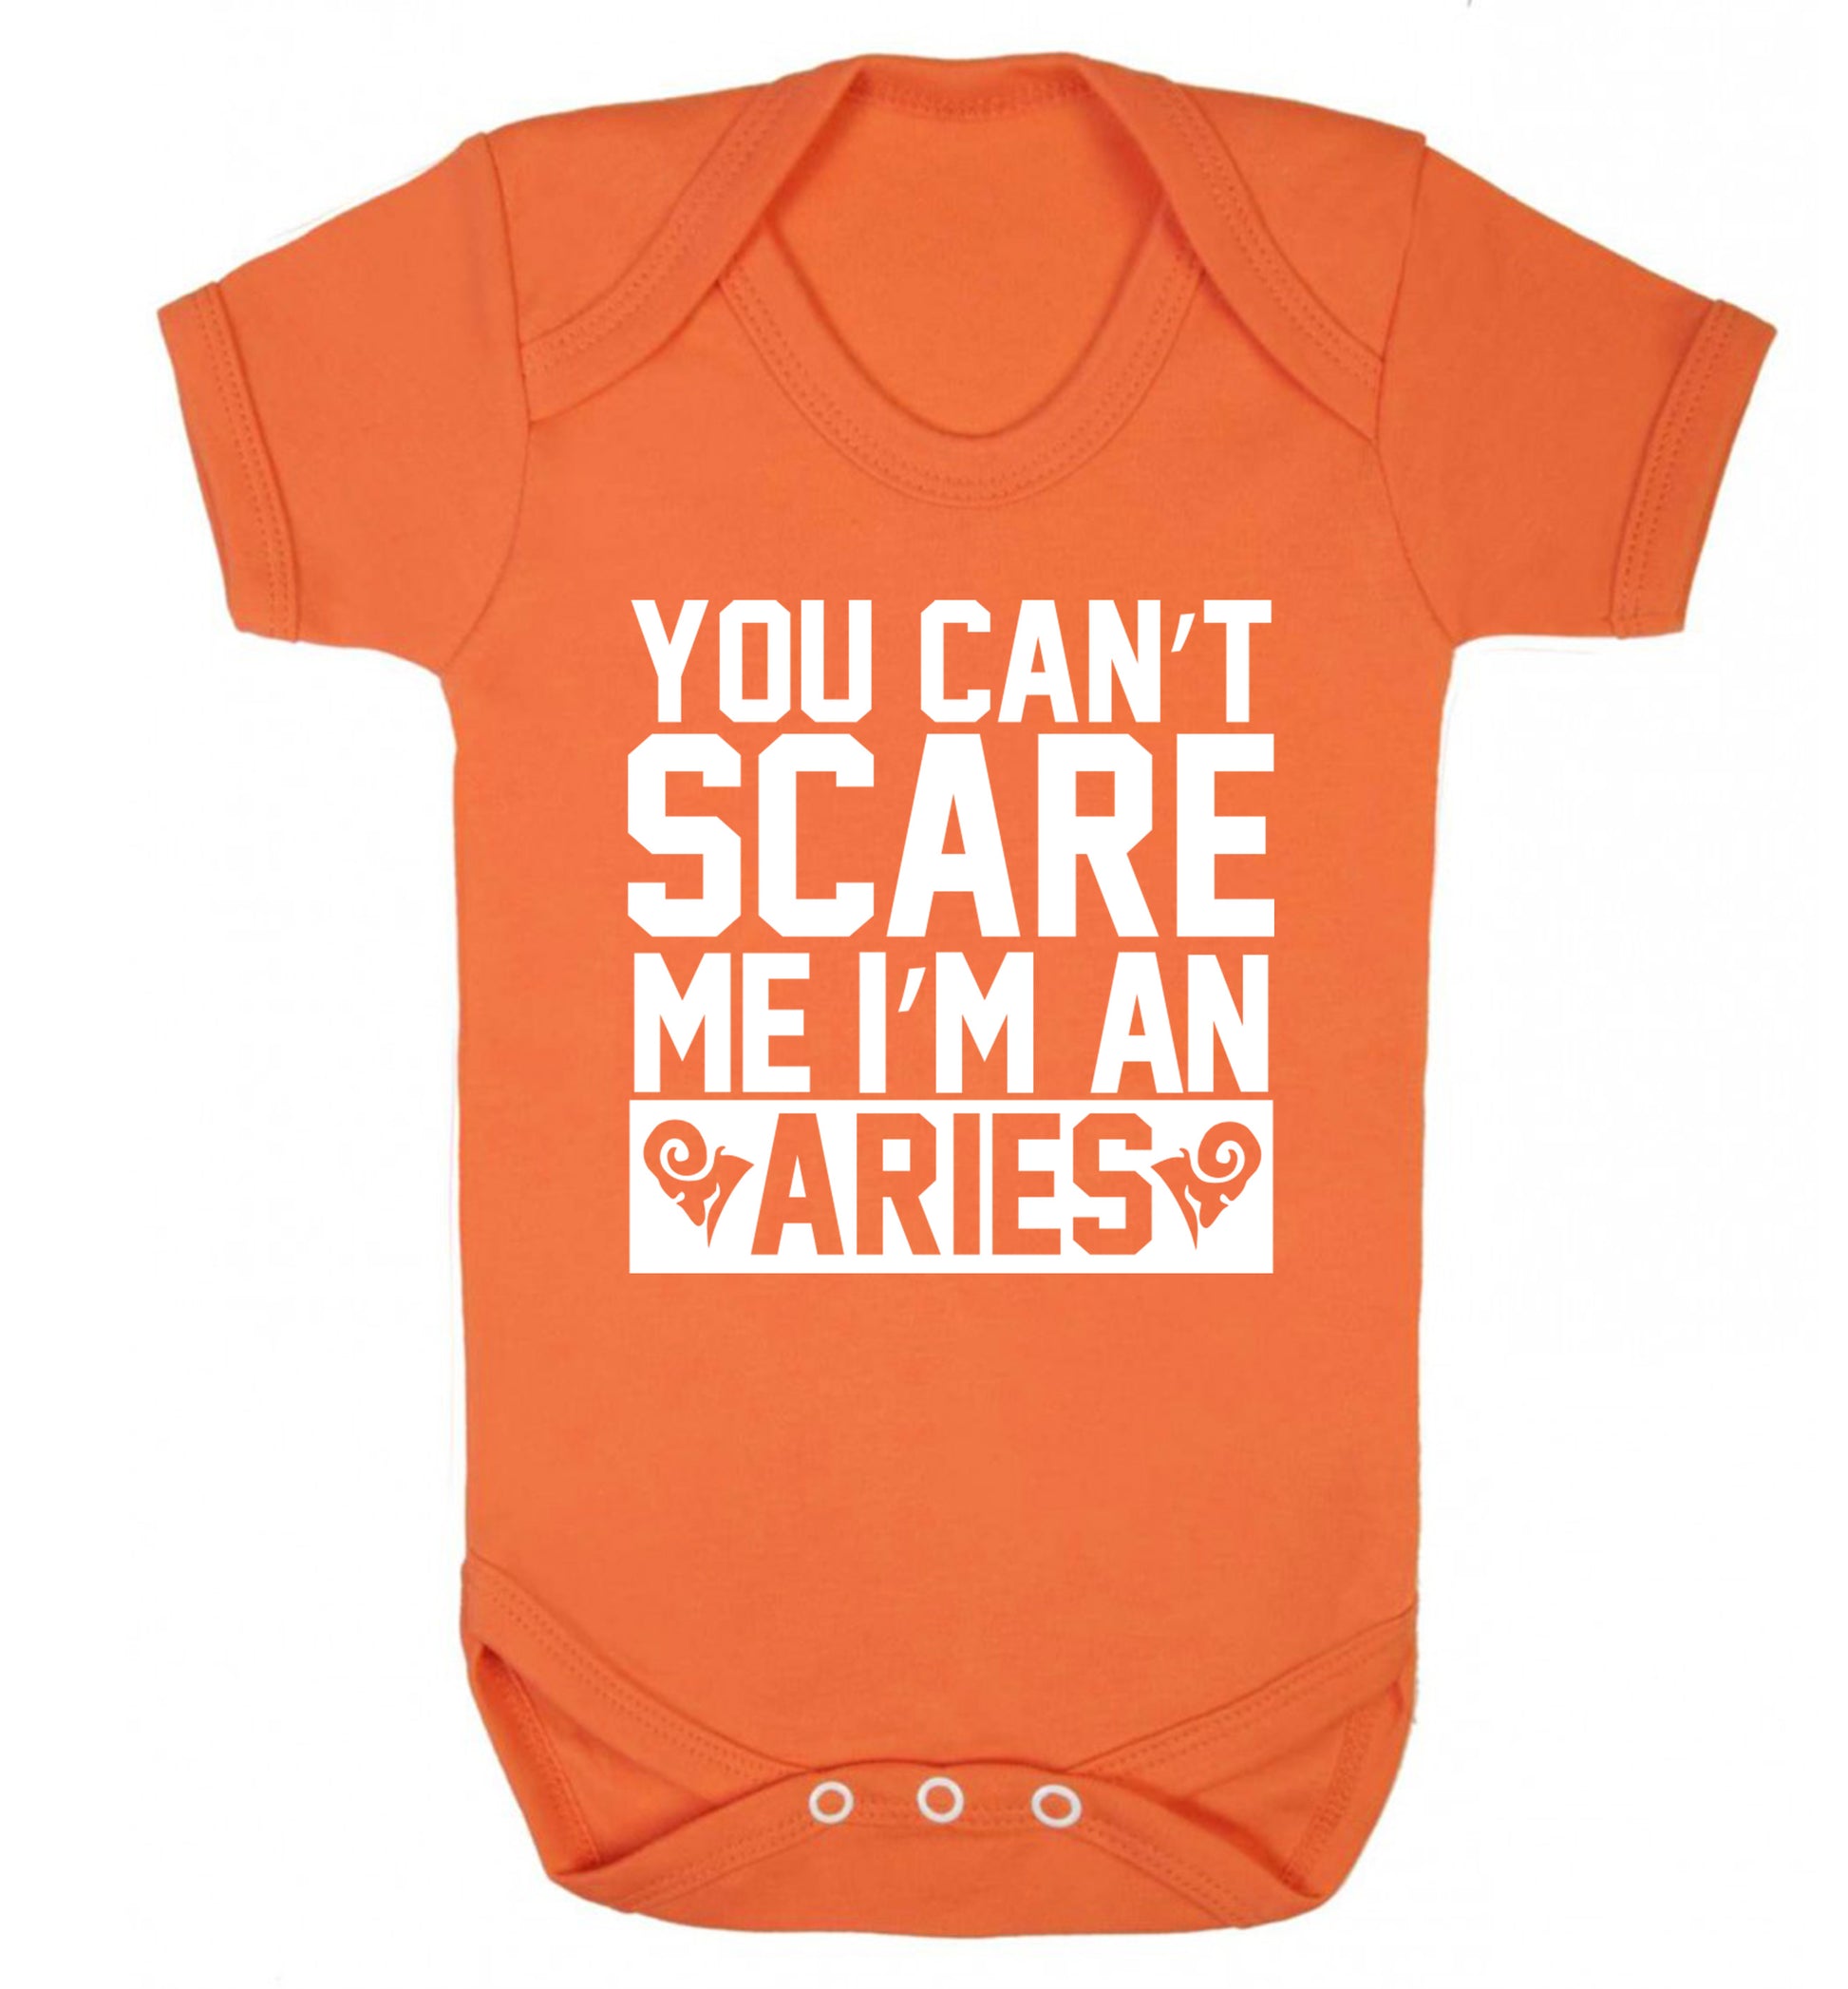 You can't scare me I'm an aries Baby Vest orange 18-24 months